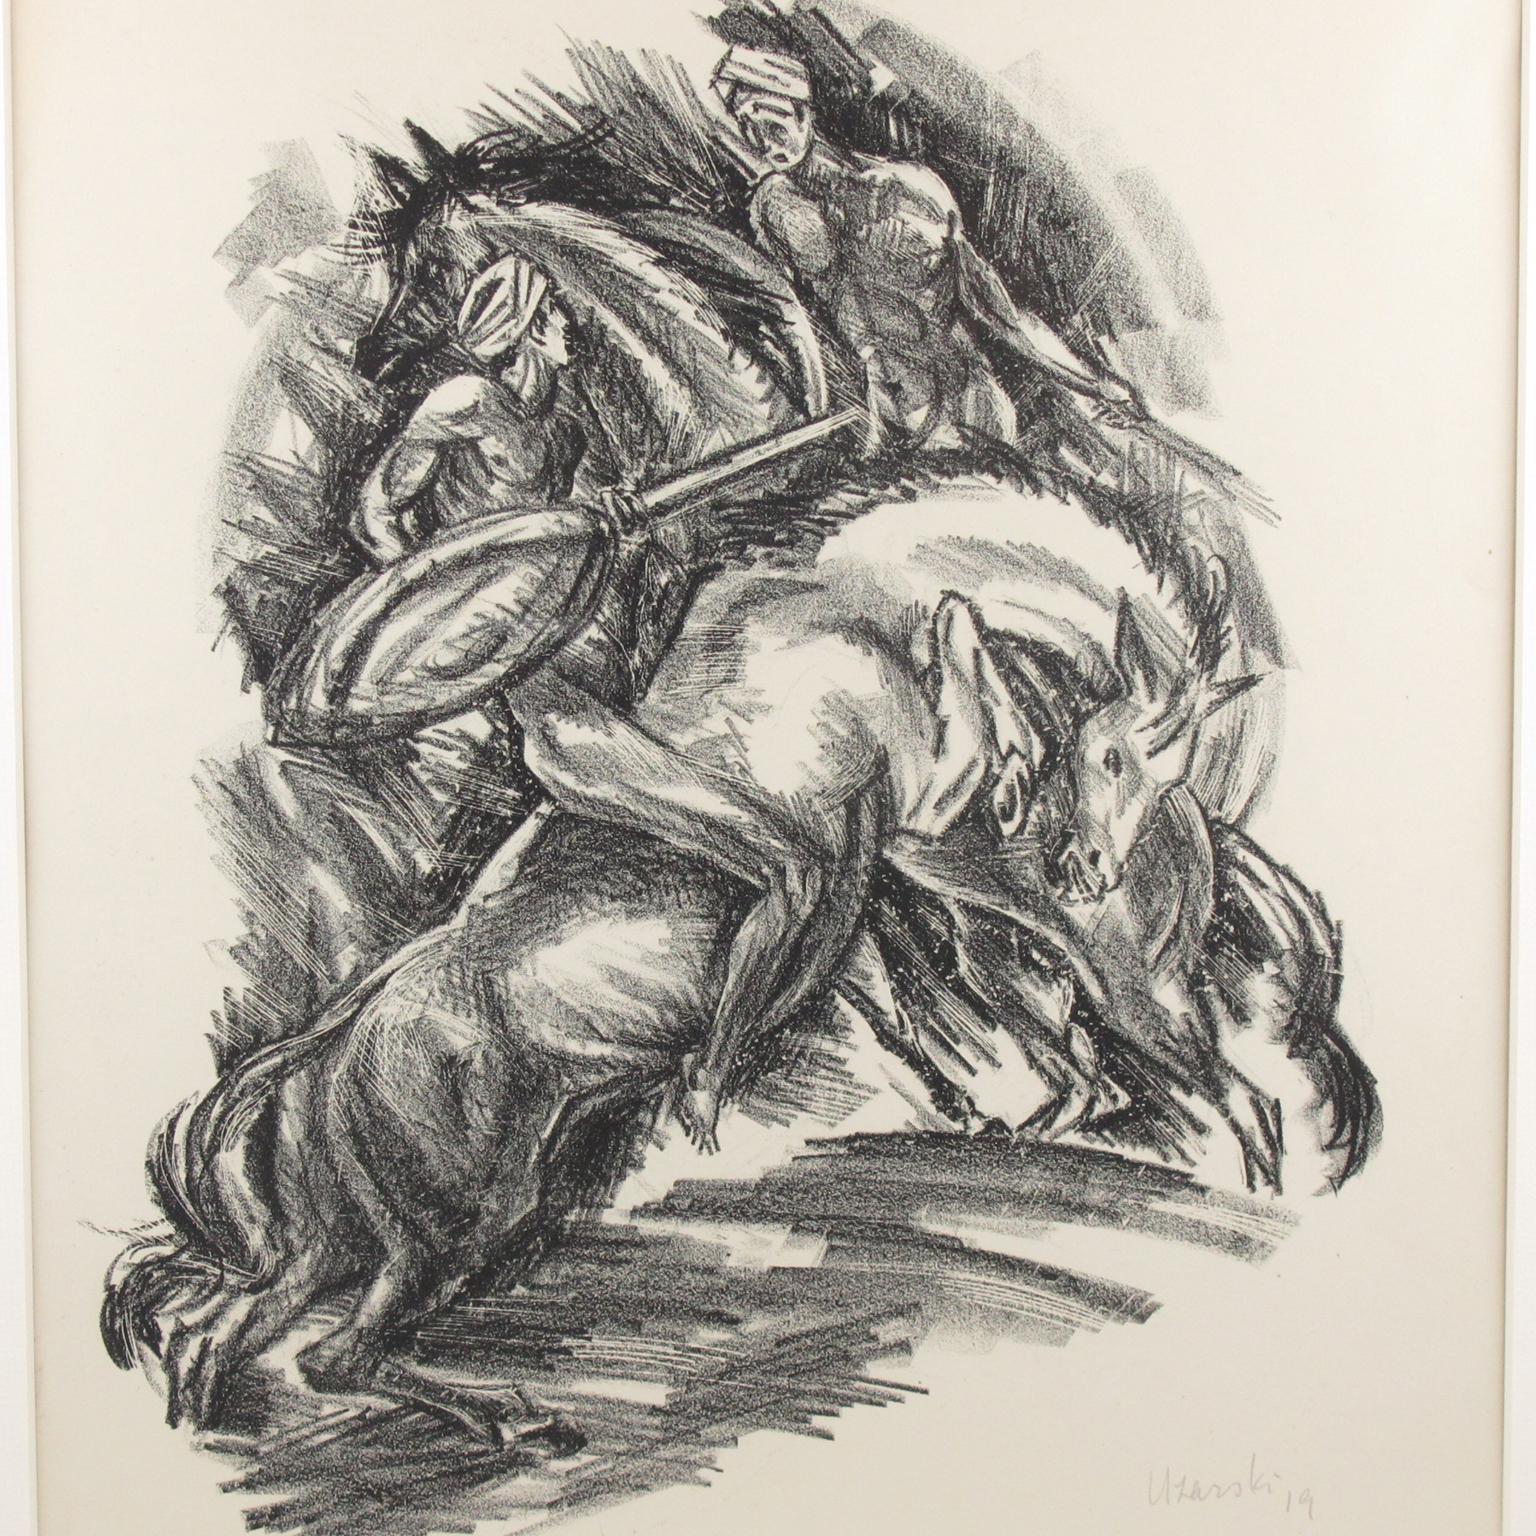 Stunning charcoal drawing lithograph on paper depicting two riders in a wild dance or fight, designed by Adolf Uzarski (1885-1970), a German artist. This drawing is from a set of lithographs made to illustrate scenes from the 14th century Tutinama,